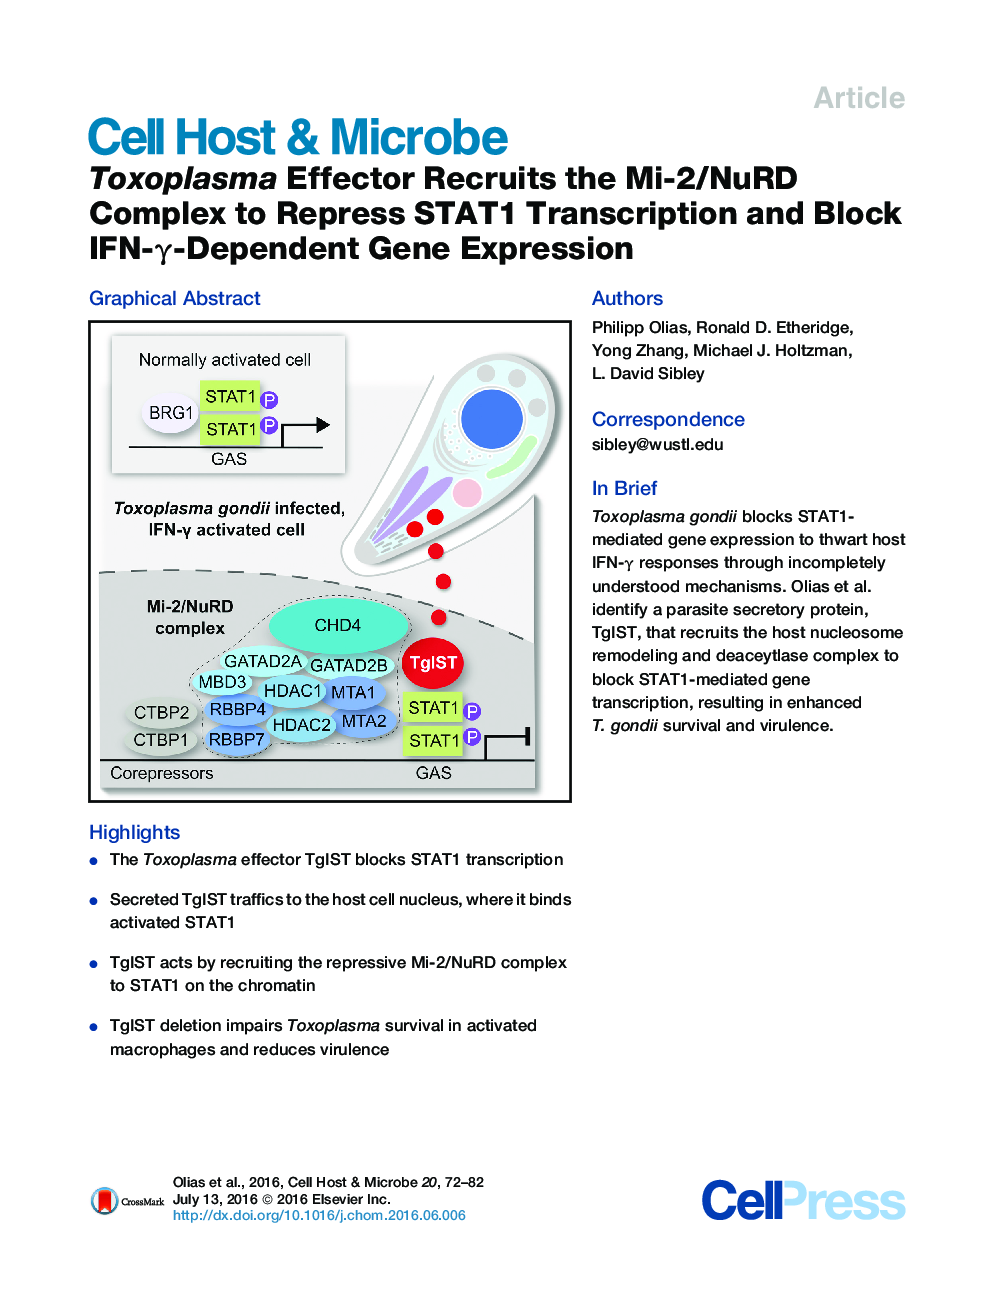 Toxoplasma Effector Recruits the Mi-2/NuRD Complex to Repress STAT1 Transcription and Block IFN-γ-Dependent Gene Expression